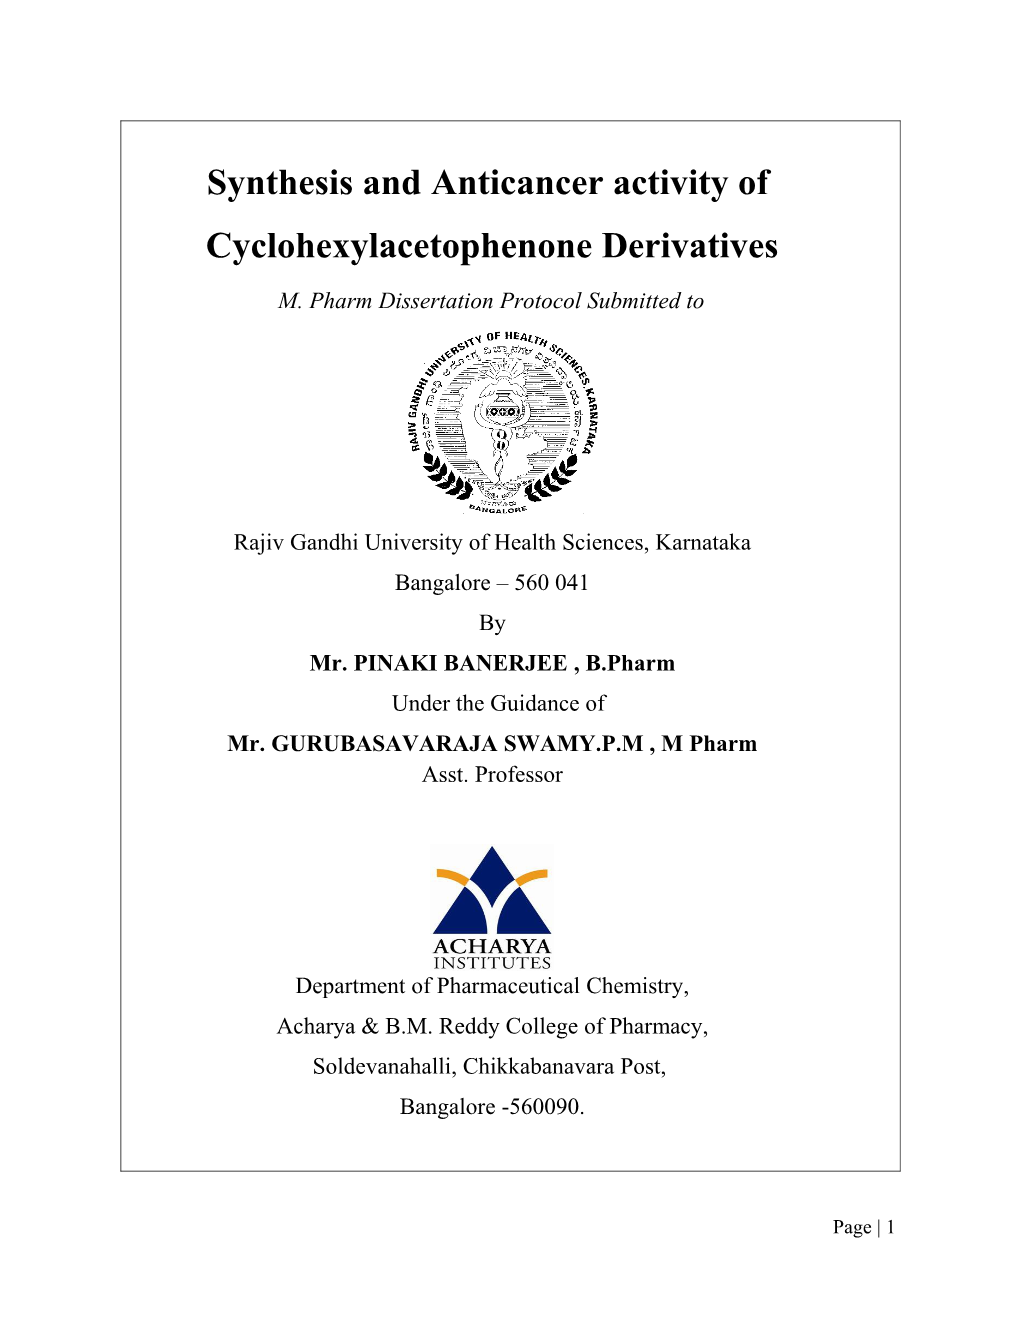 Synthesis and Anticancer Activity of Cyclohexylacetophenone Derivatives